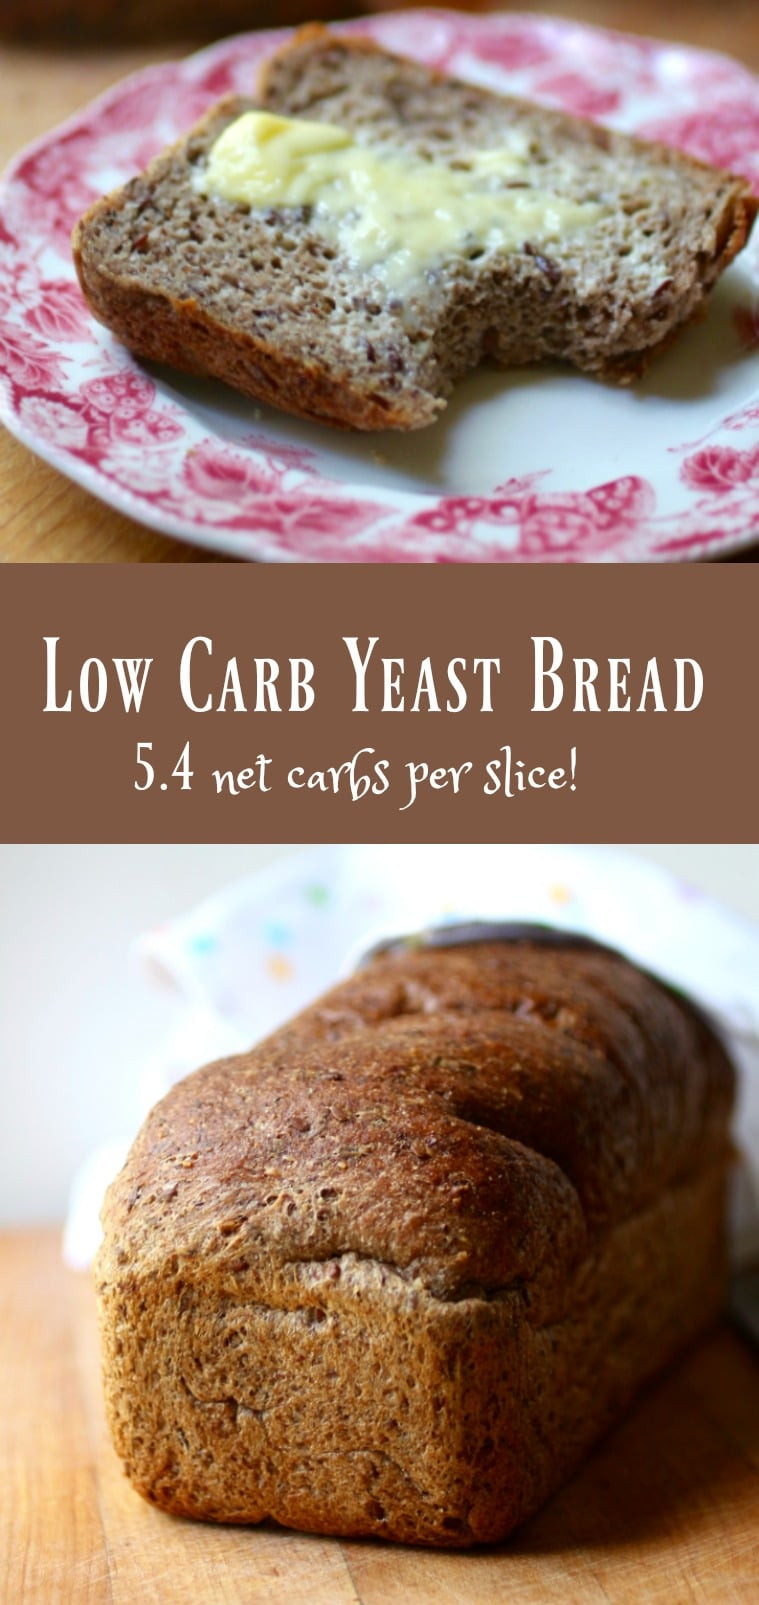 Keto Sandwich Bread Low Carb
 Low Carb Yeast Bread Keto Sandwich Bread lowcarb ology